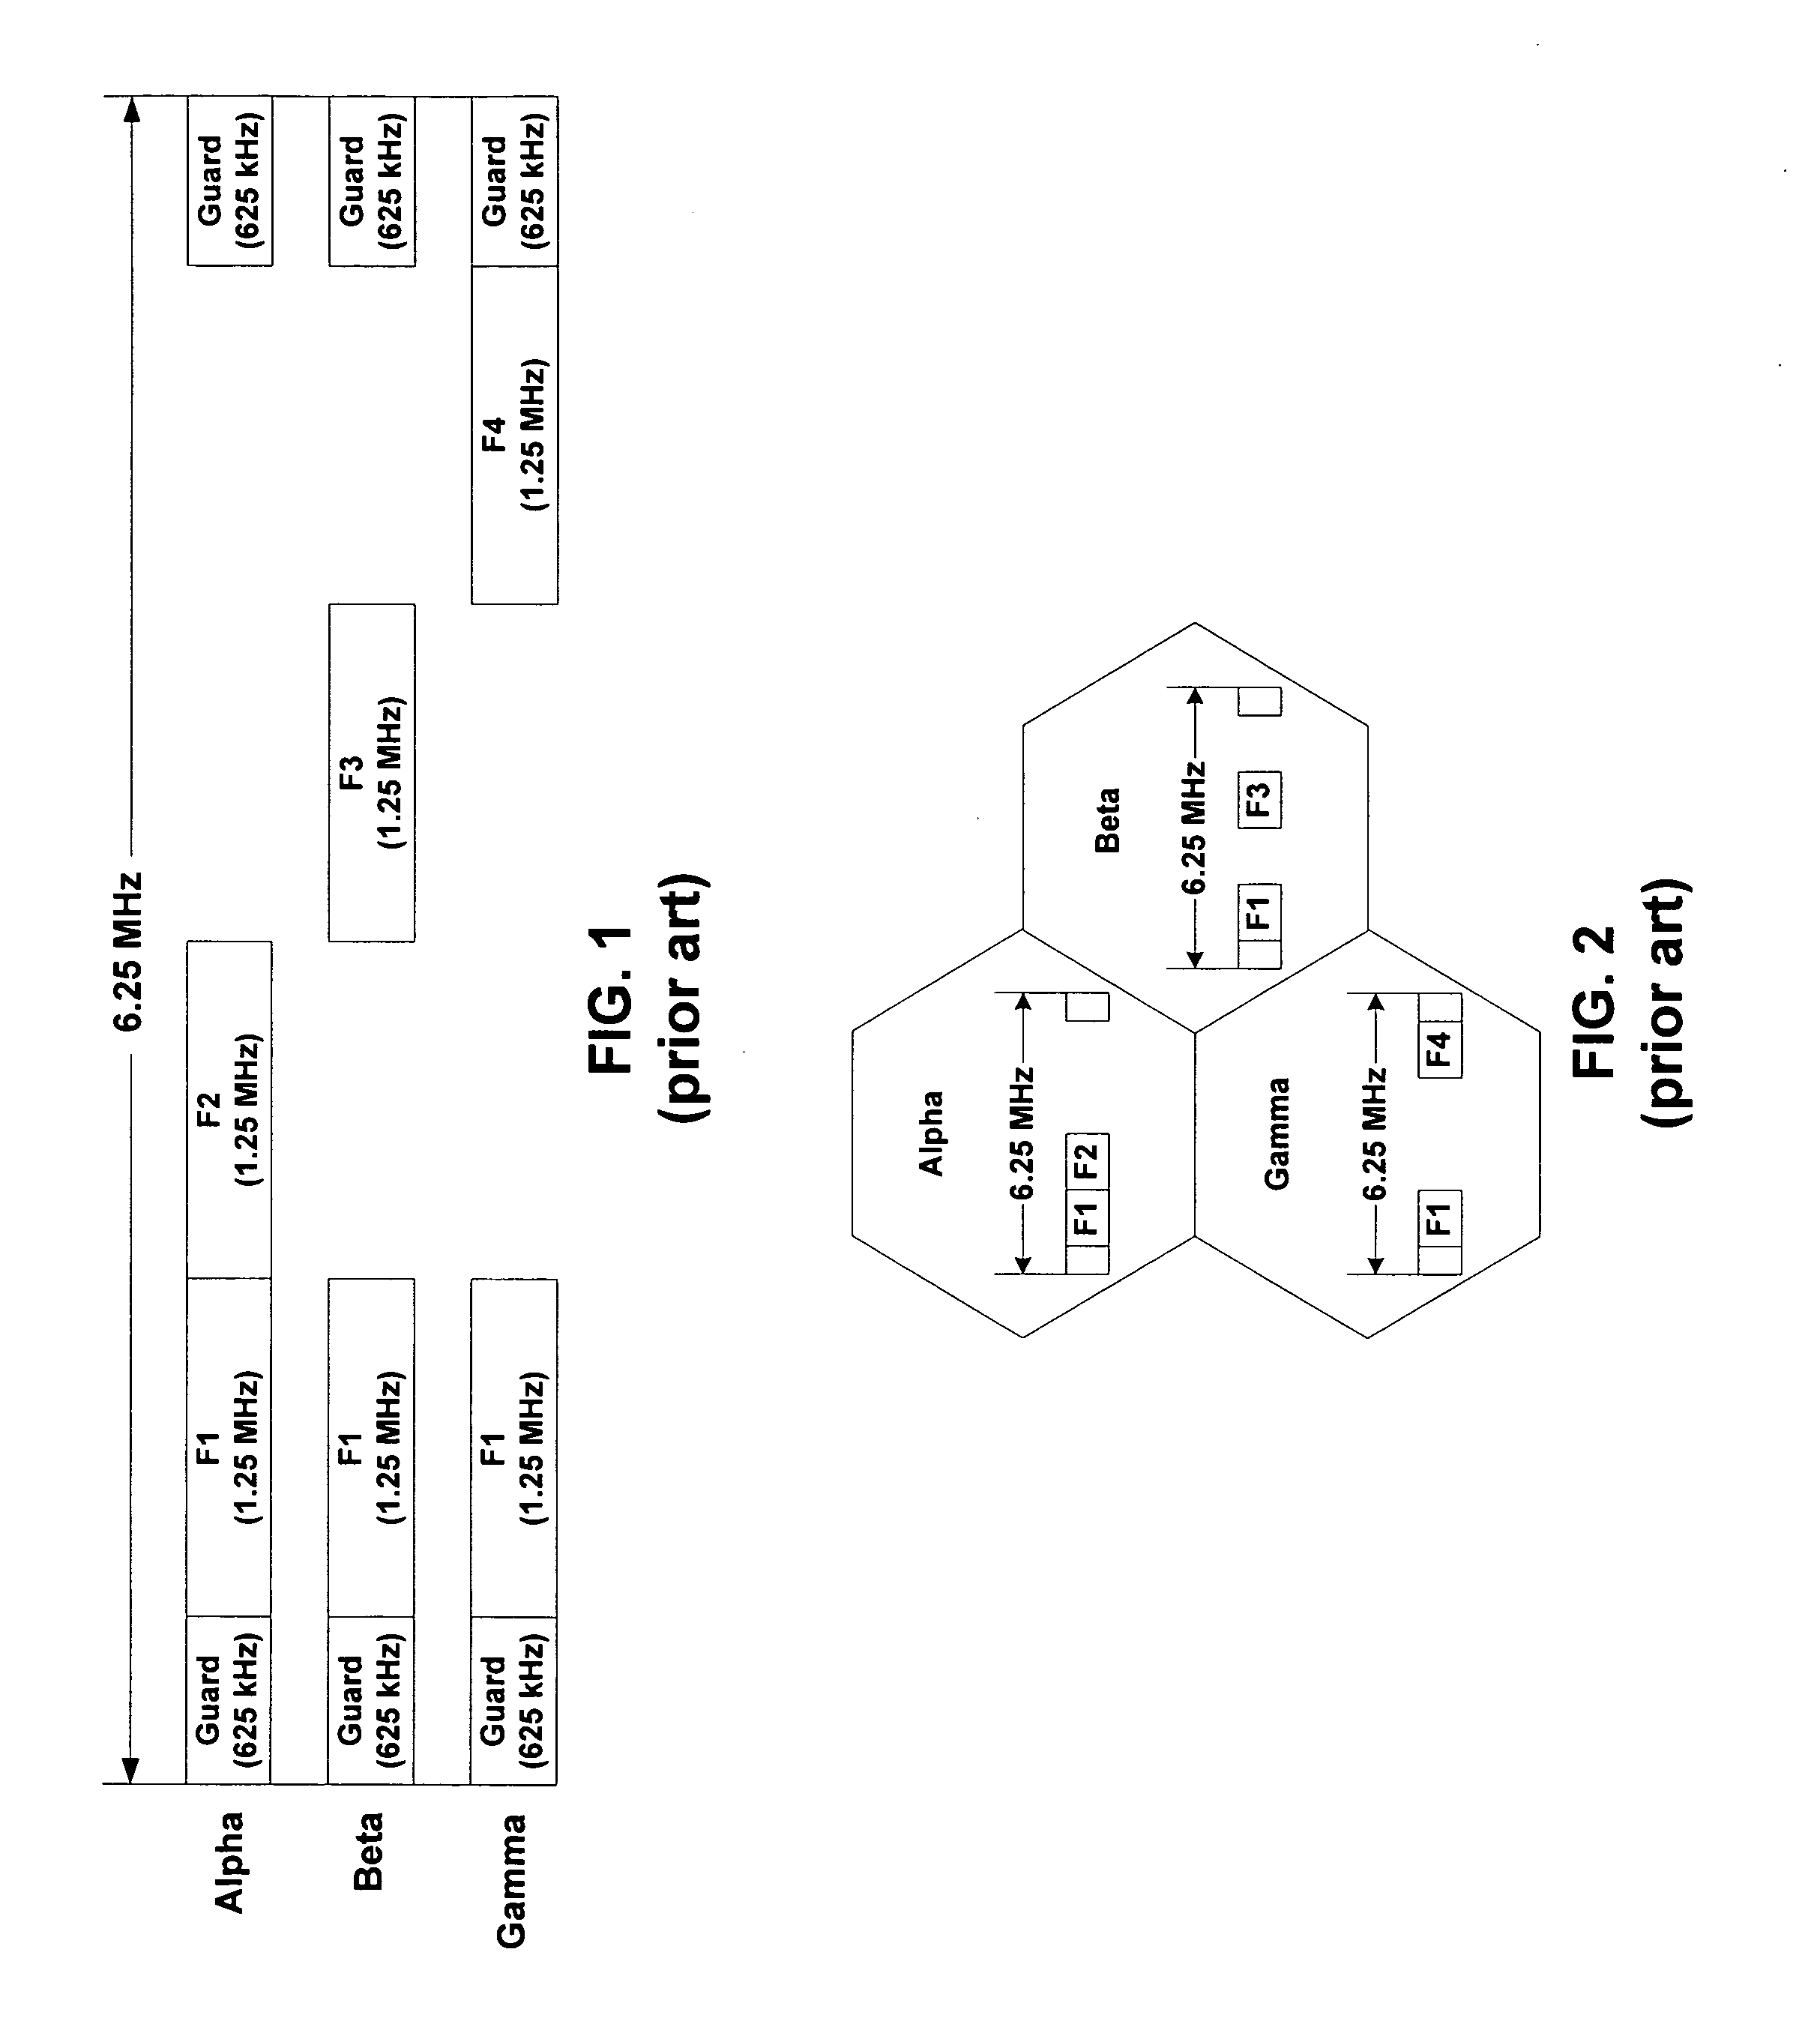 Method and system using overlapping frequency bands in a hybrid frequency reuse plan